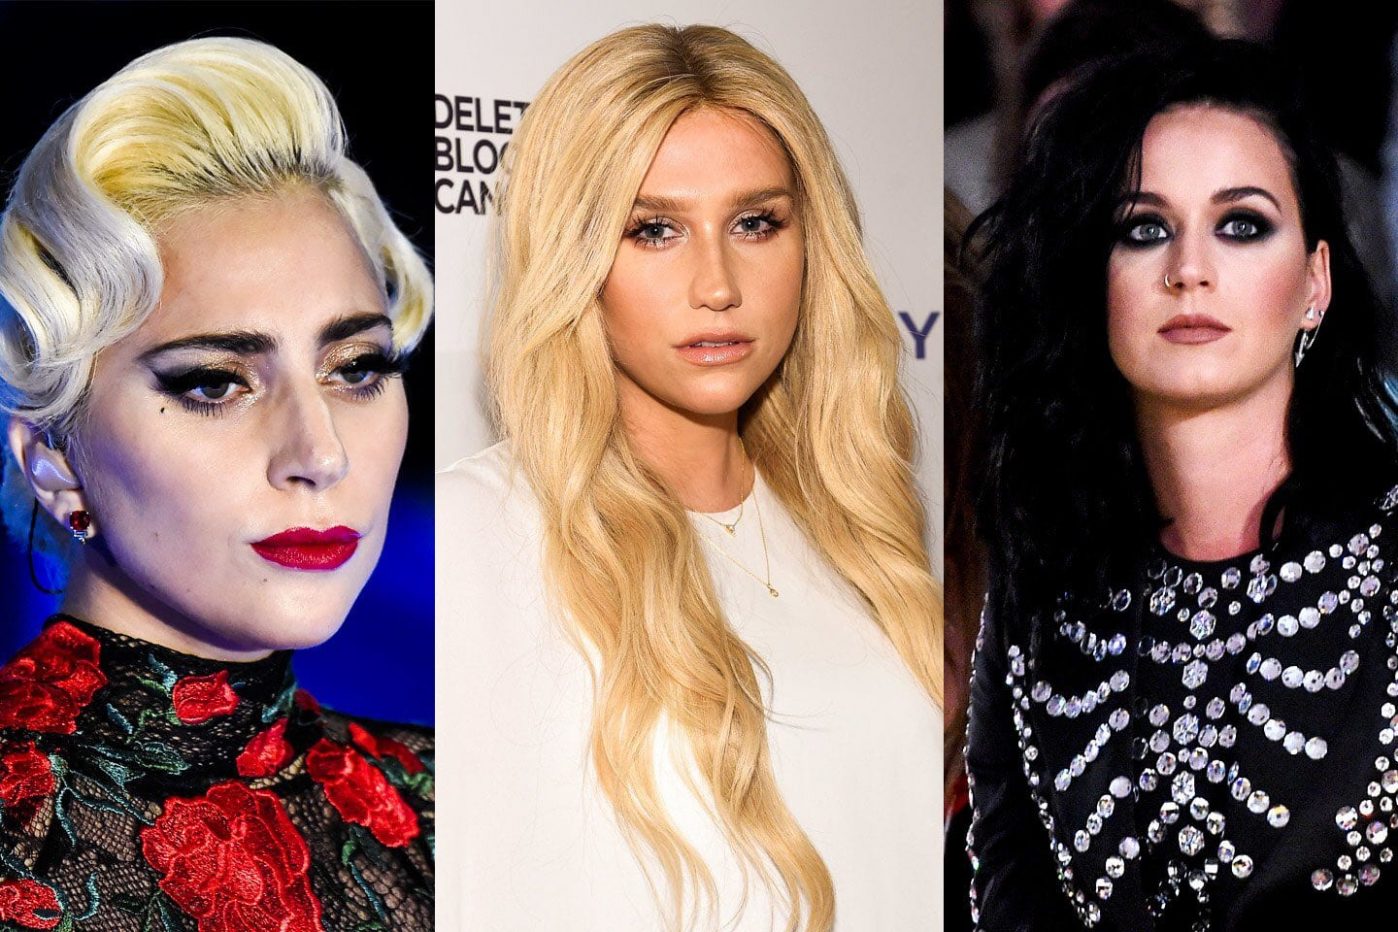 Arts & Ent | Film, TV, Music, Celebrity – Kesha ordered to pay Dr Luke over rape claims – First look at Keanu’s return to The Matrix & Louis Tomlinson’s new album ‘Walls’ 